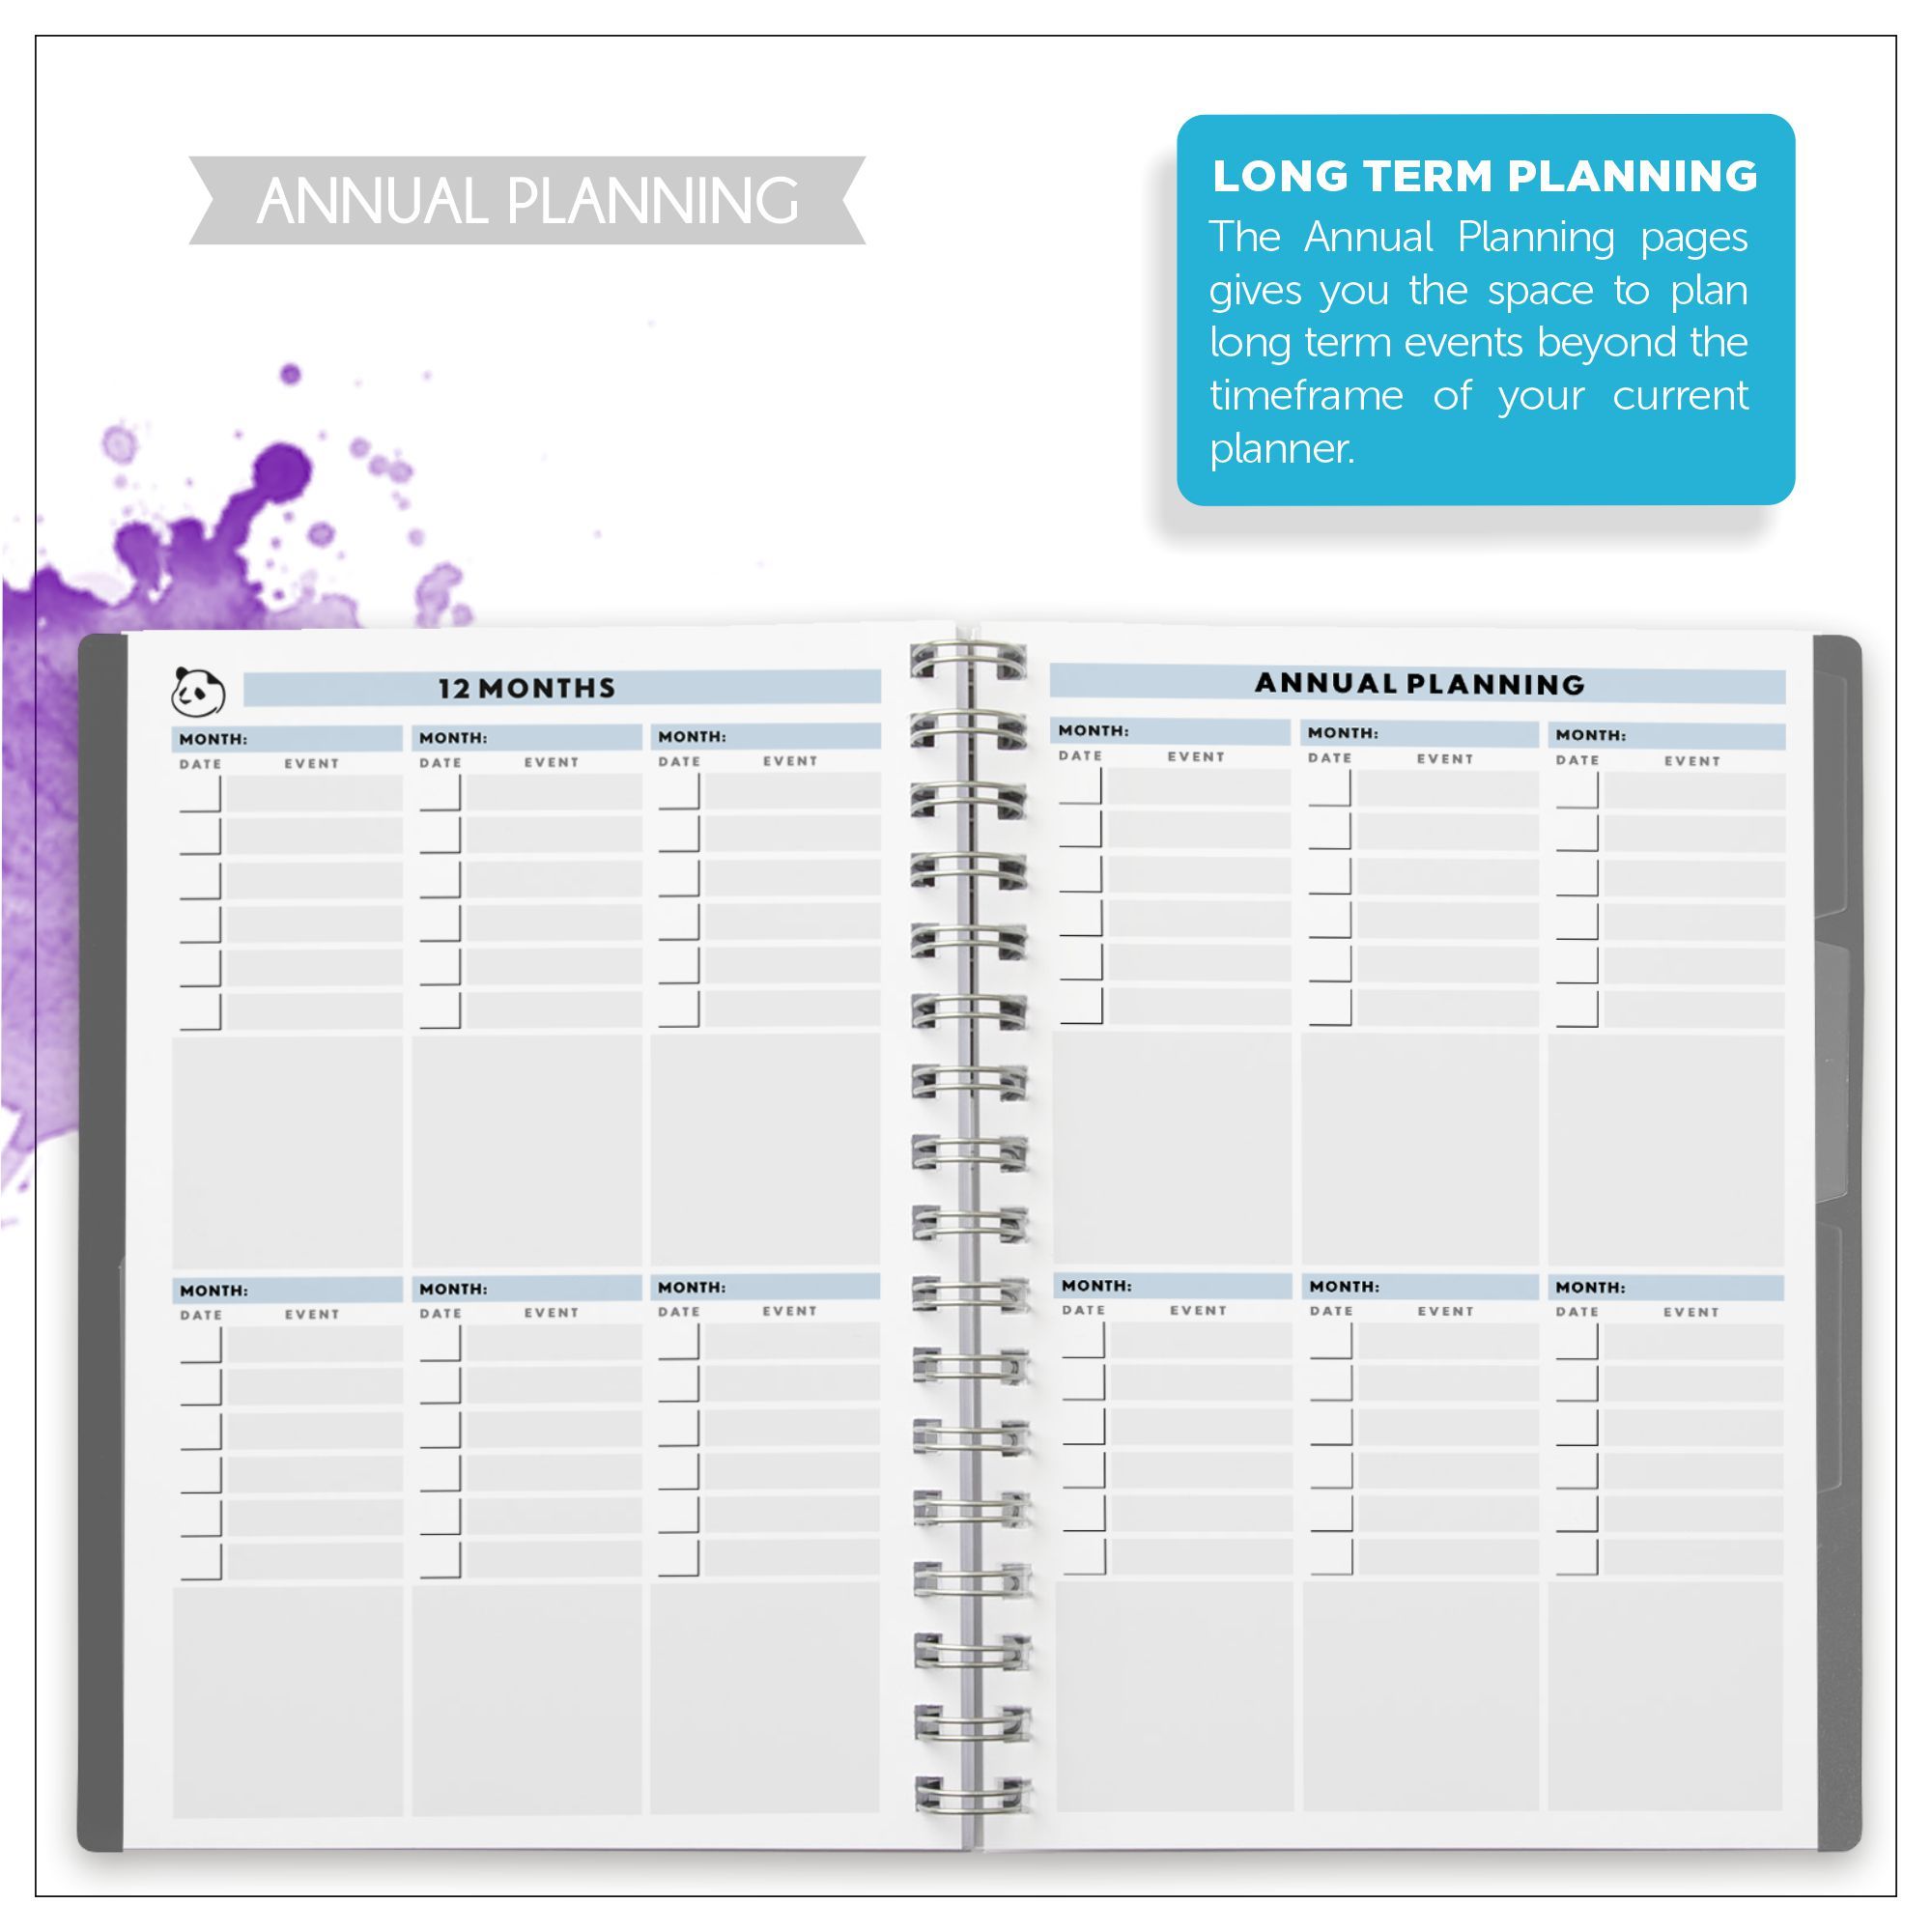  Panda Planner Undated Daily Planner - 90 Day Organization -  VIA Strengths Based Productivity & Happiness - Set Goals - Bonus Weekly &  Monthly Agenda - Light Blue - Hardcover : Office Products